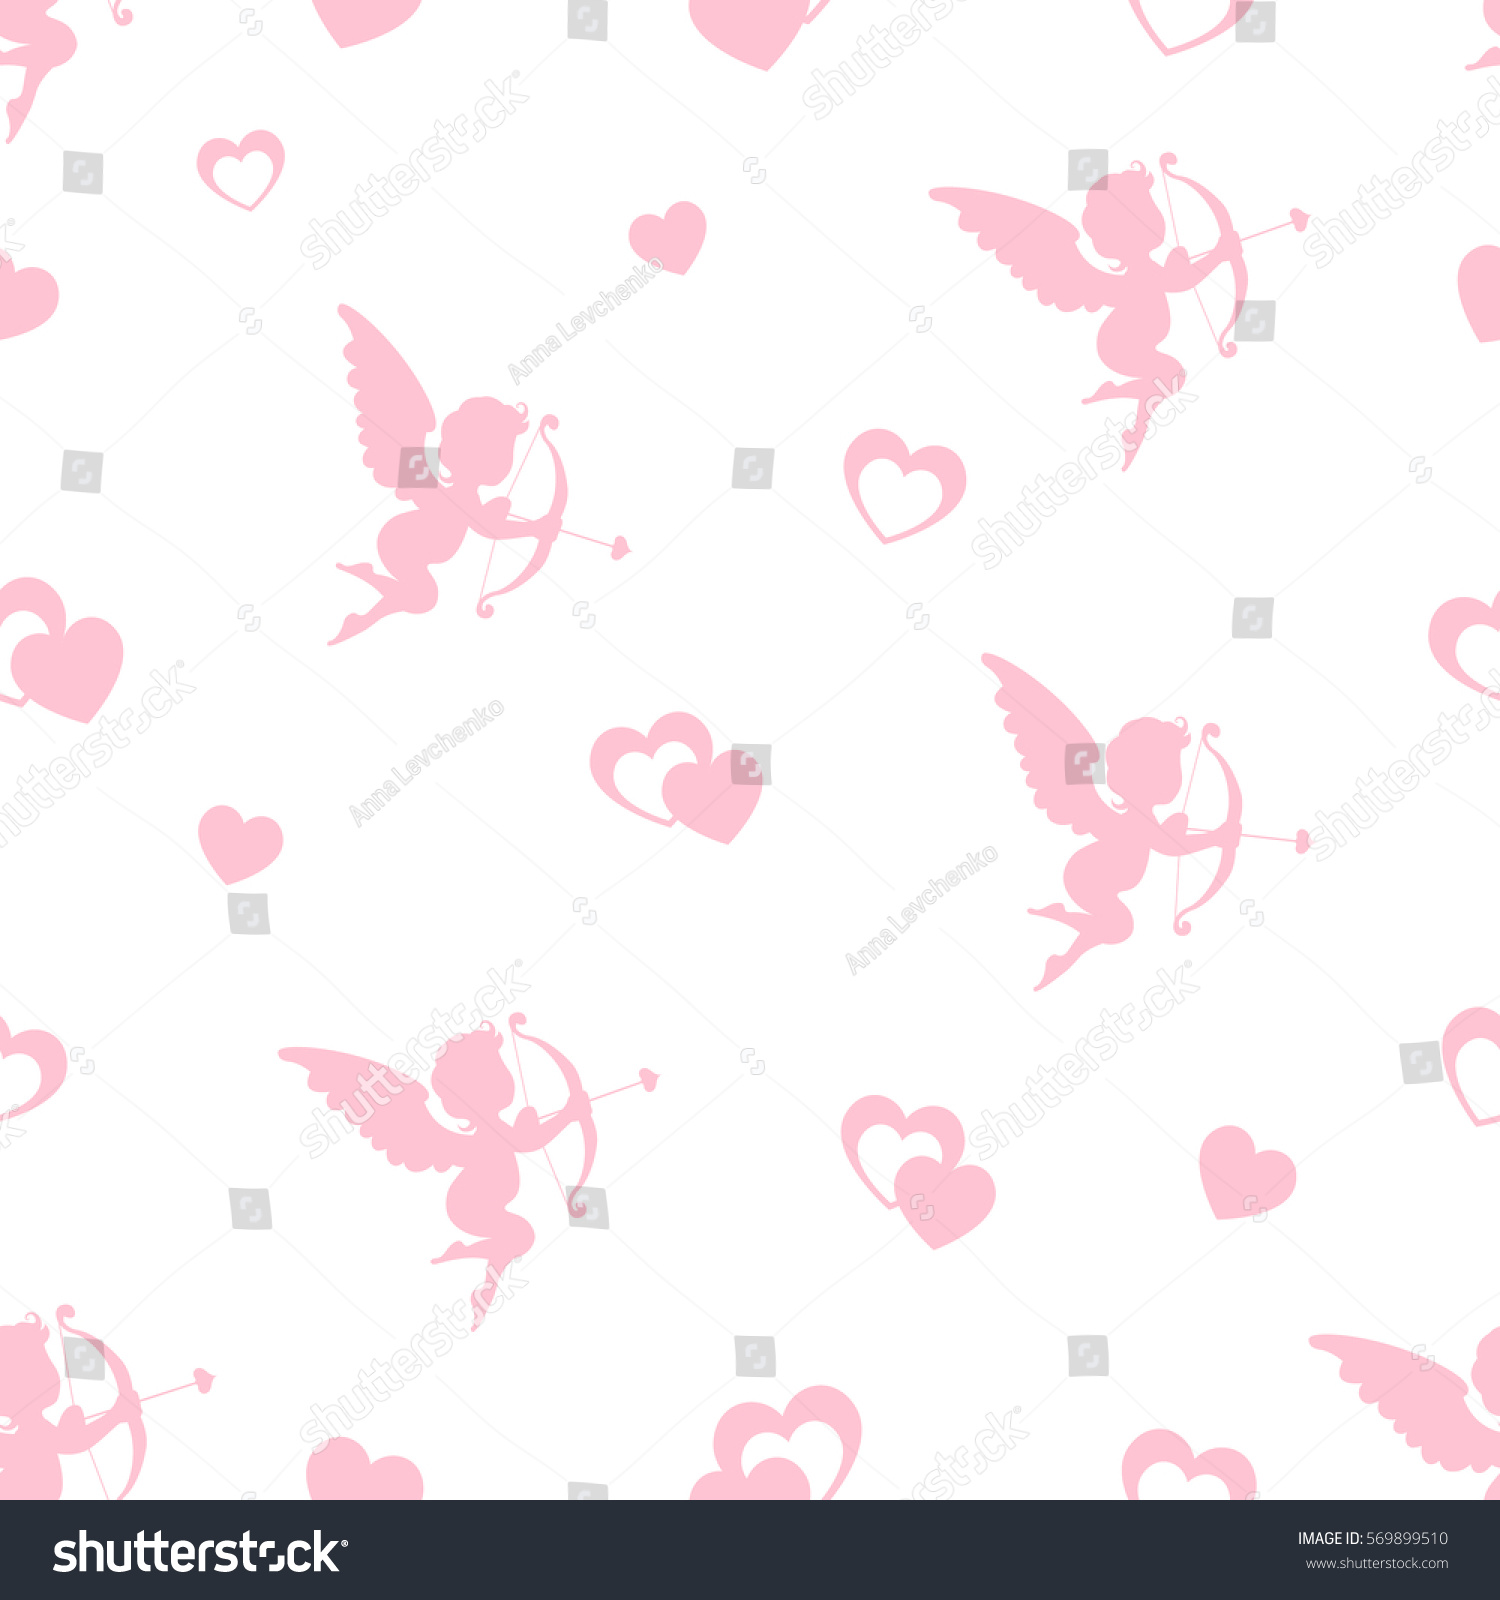 Seamless Pattern Cupids Hearts Valentines Day Stock Vector Royalty Free 569899510 Shutterstock 2888